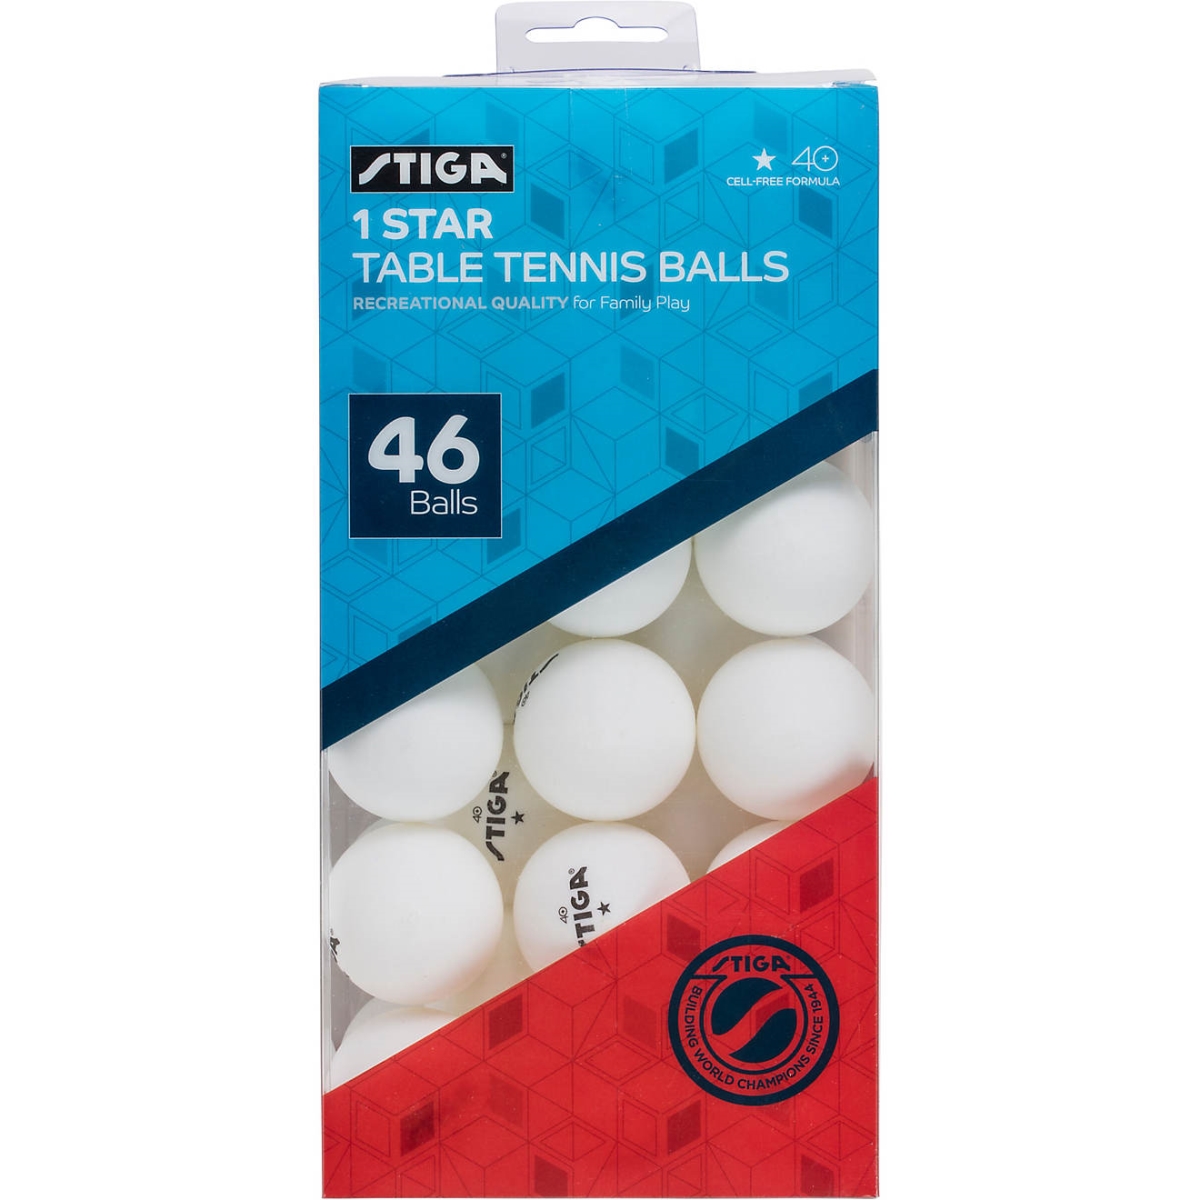 Picture of Stiga T1460 1-Star Table Tennis Balls, White - Pack of 46